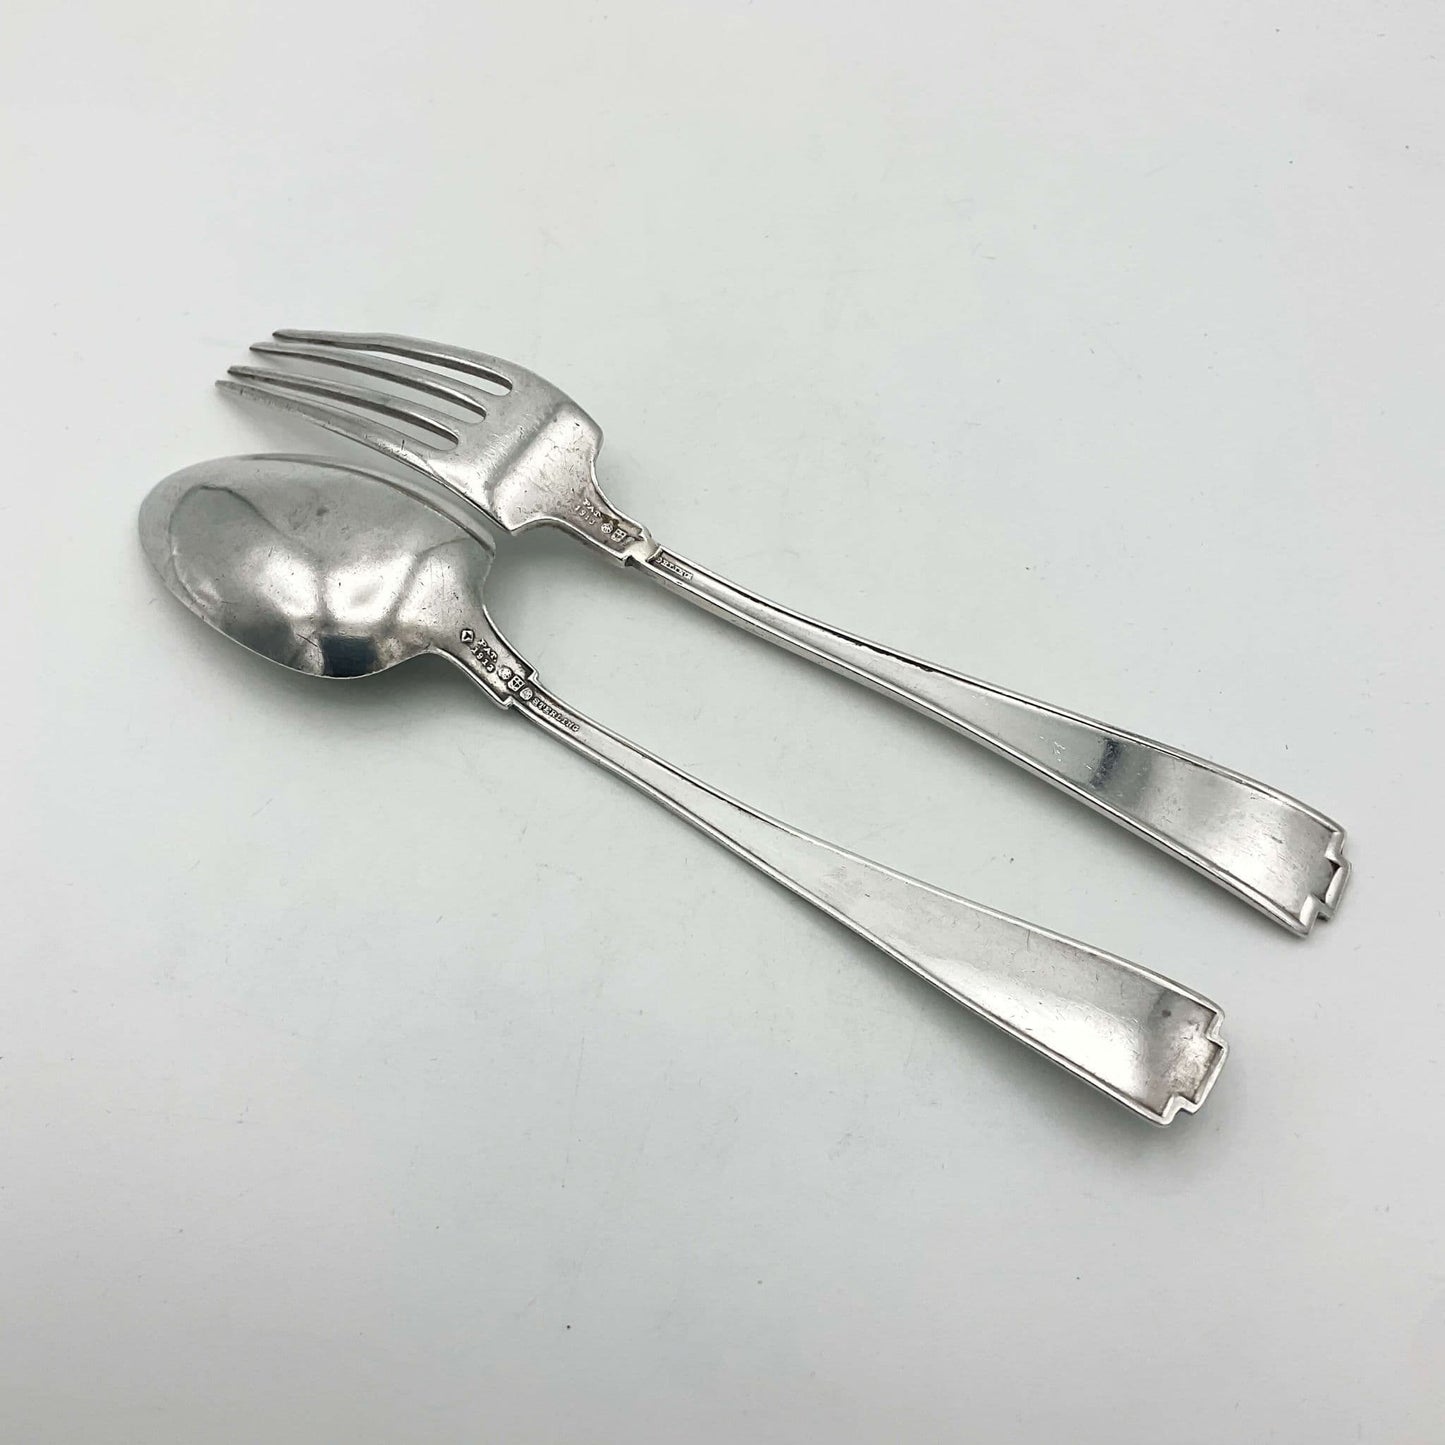 Antique Small Silver Spoon and Fork, Christening Gift